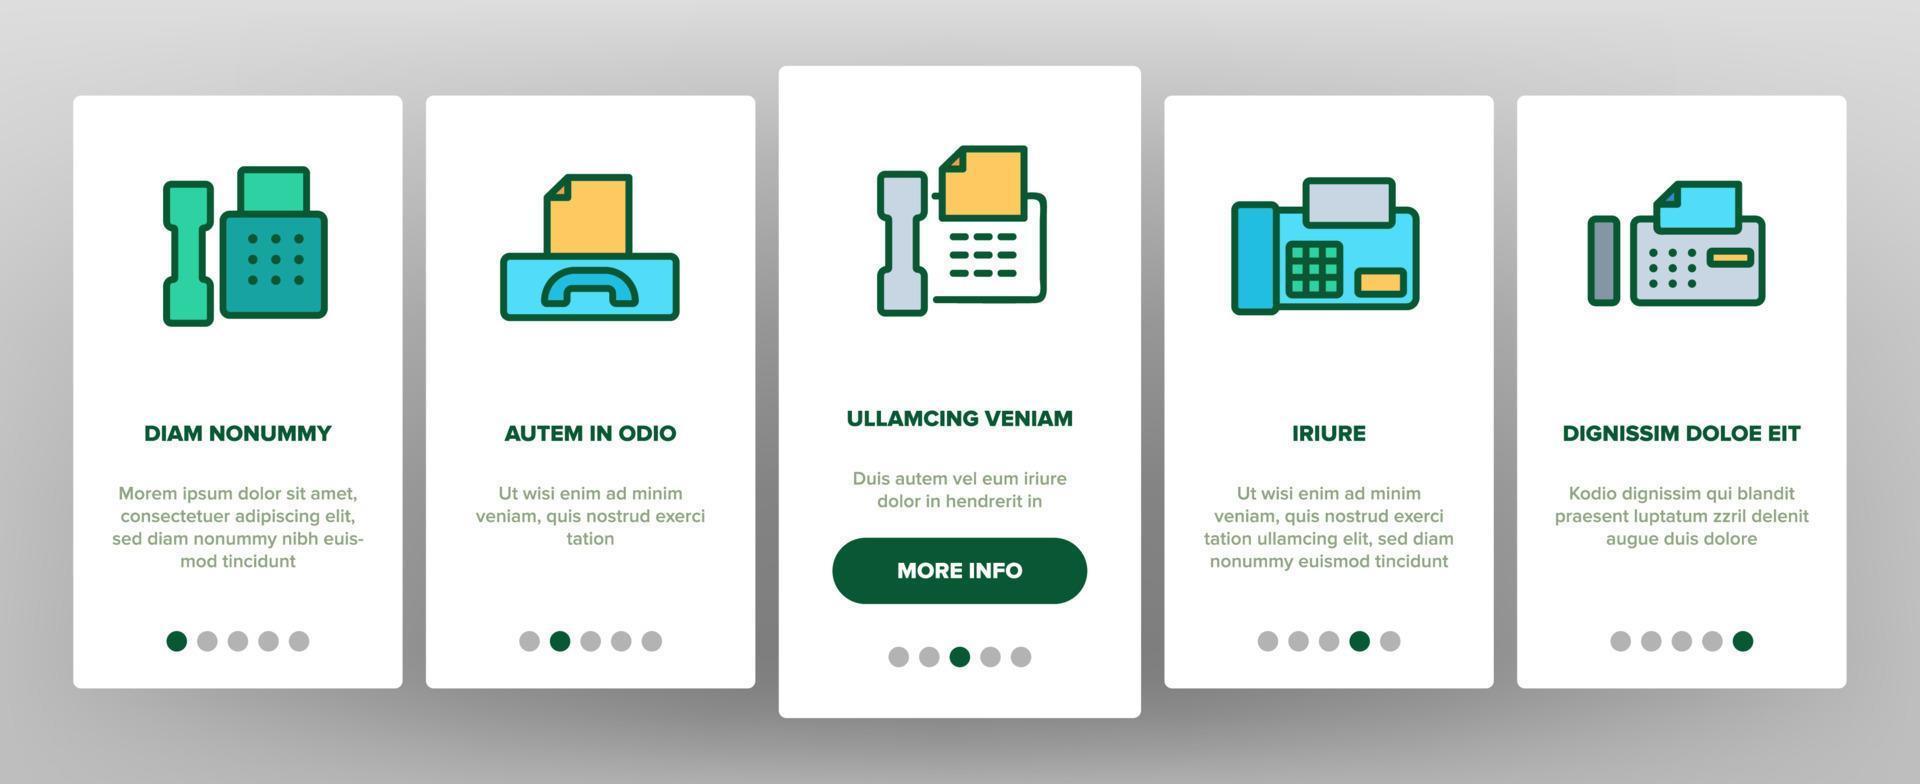 Fax Printer Onboarding Icons Set Vector